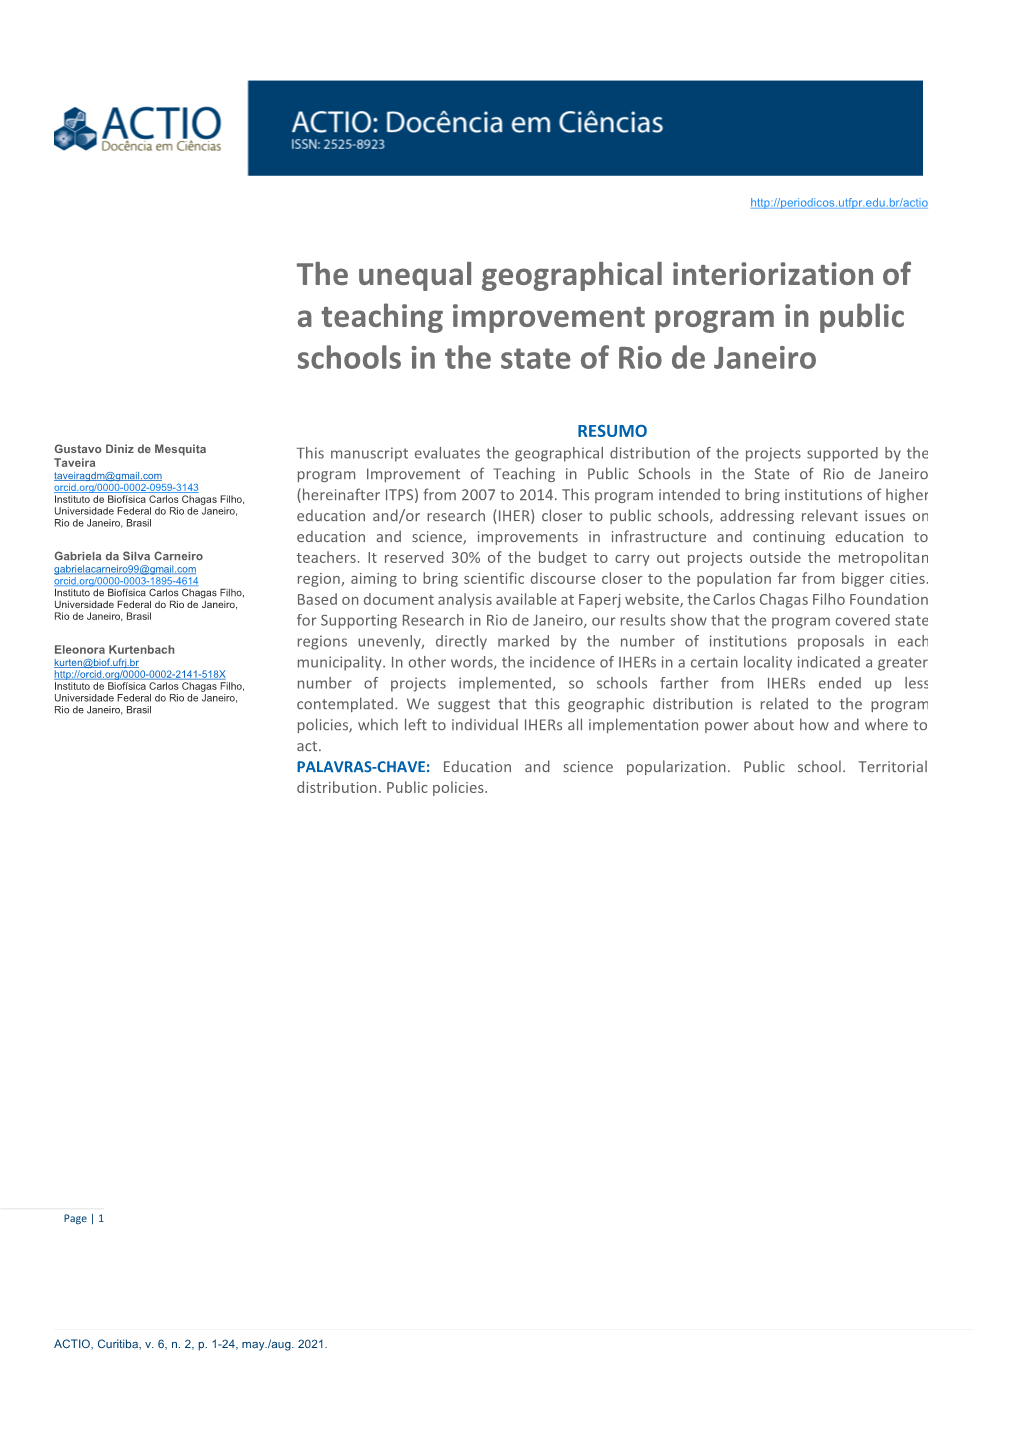 The Unequal Geographical Interiorization of a Teaching Improvement Program in Public Schools in the State of Rio De Janeiro